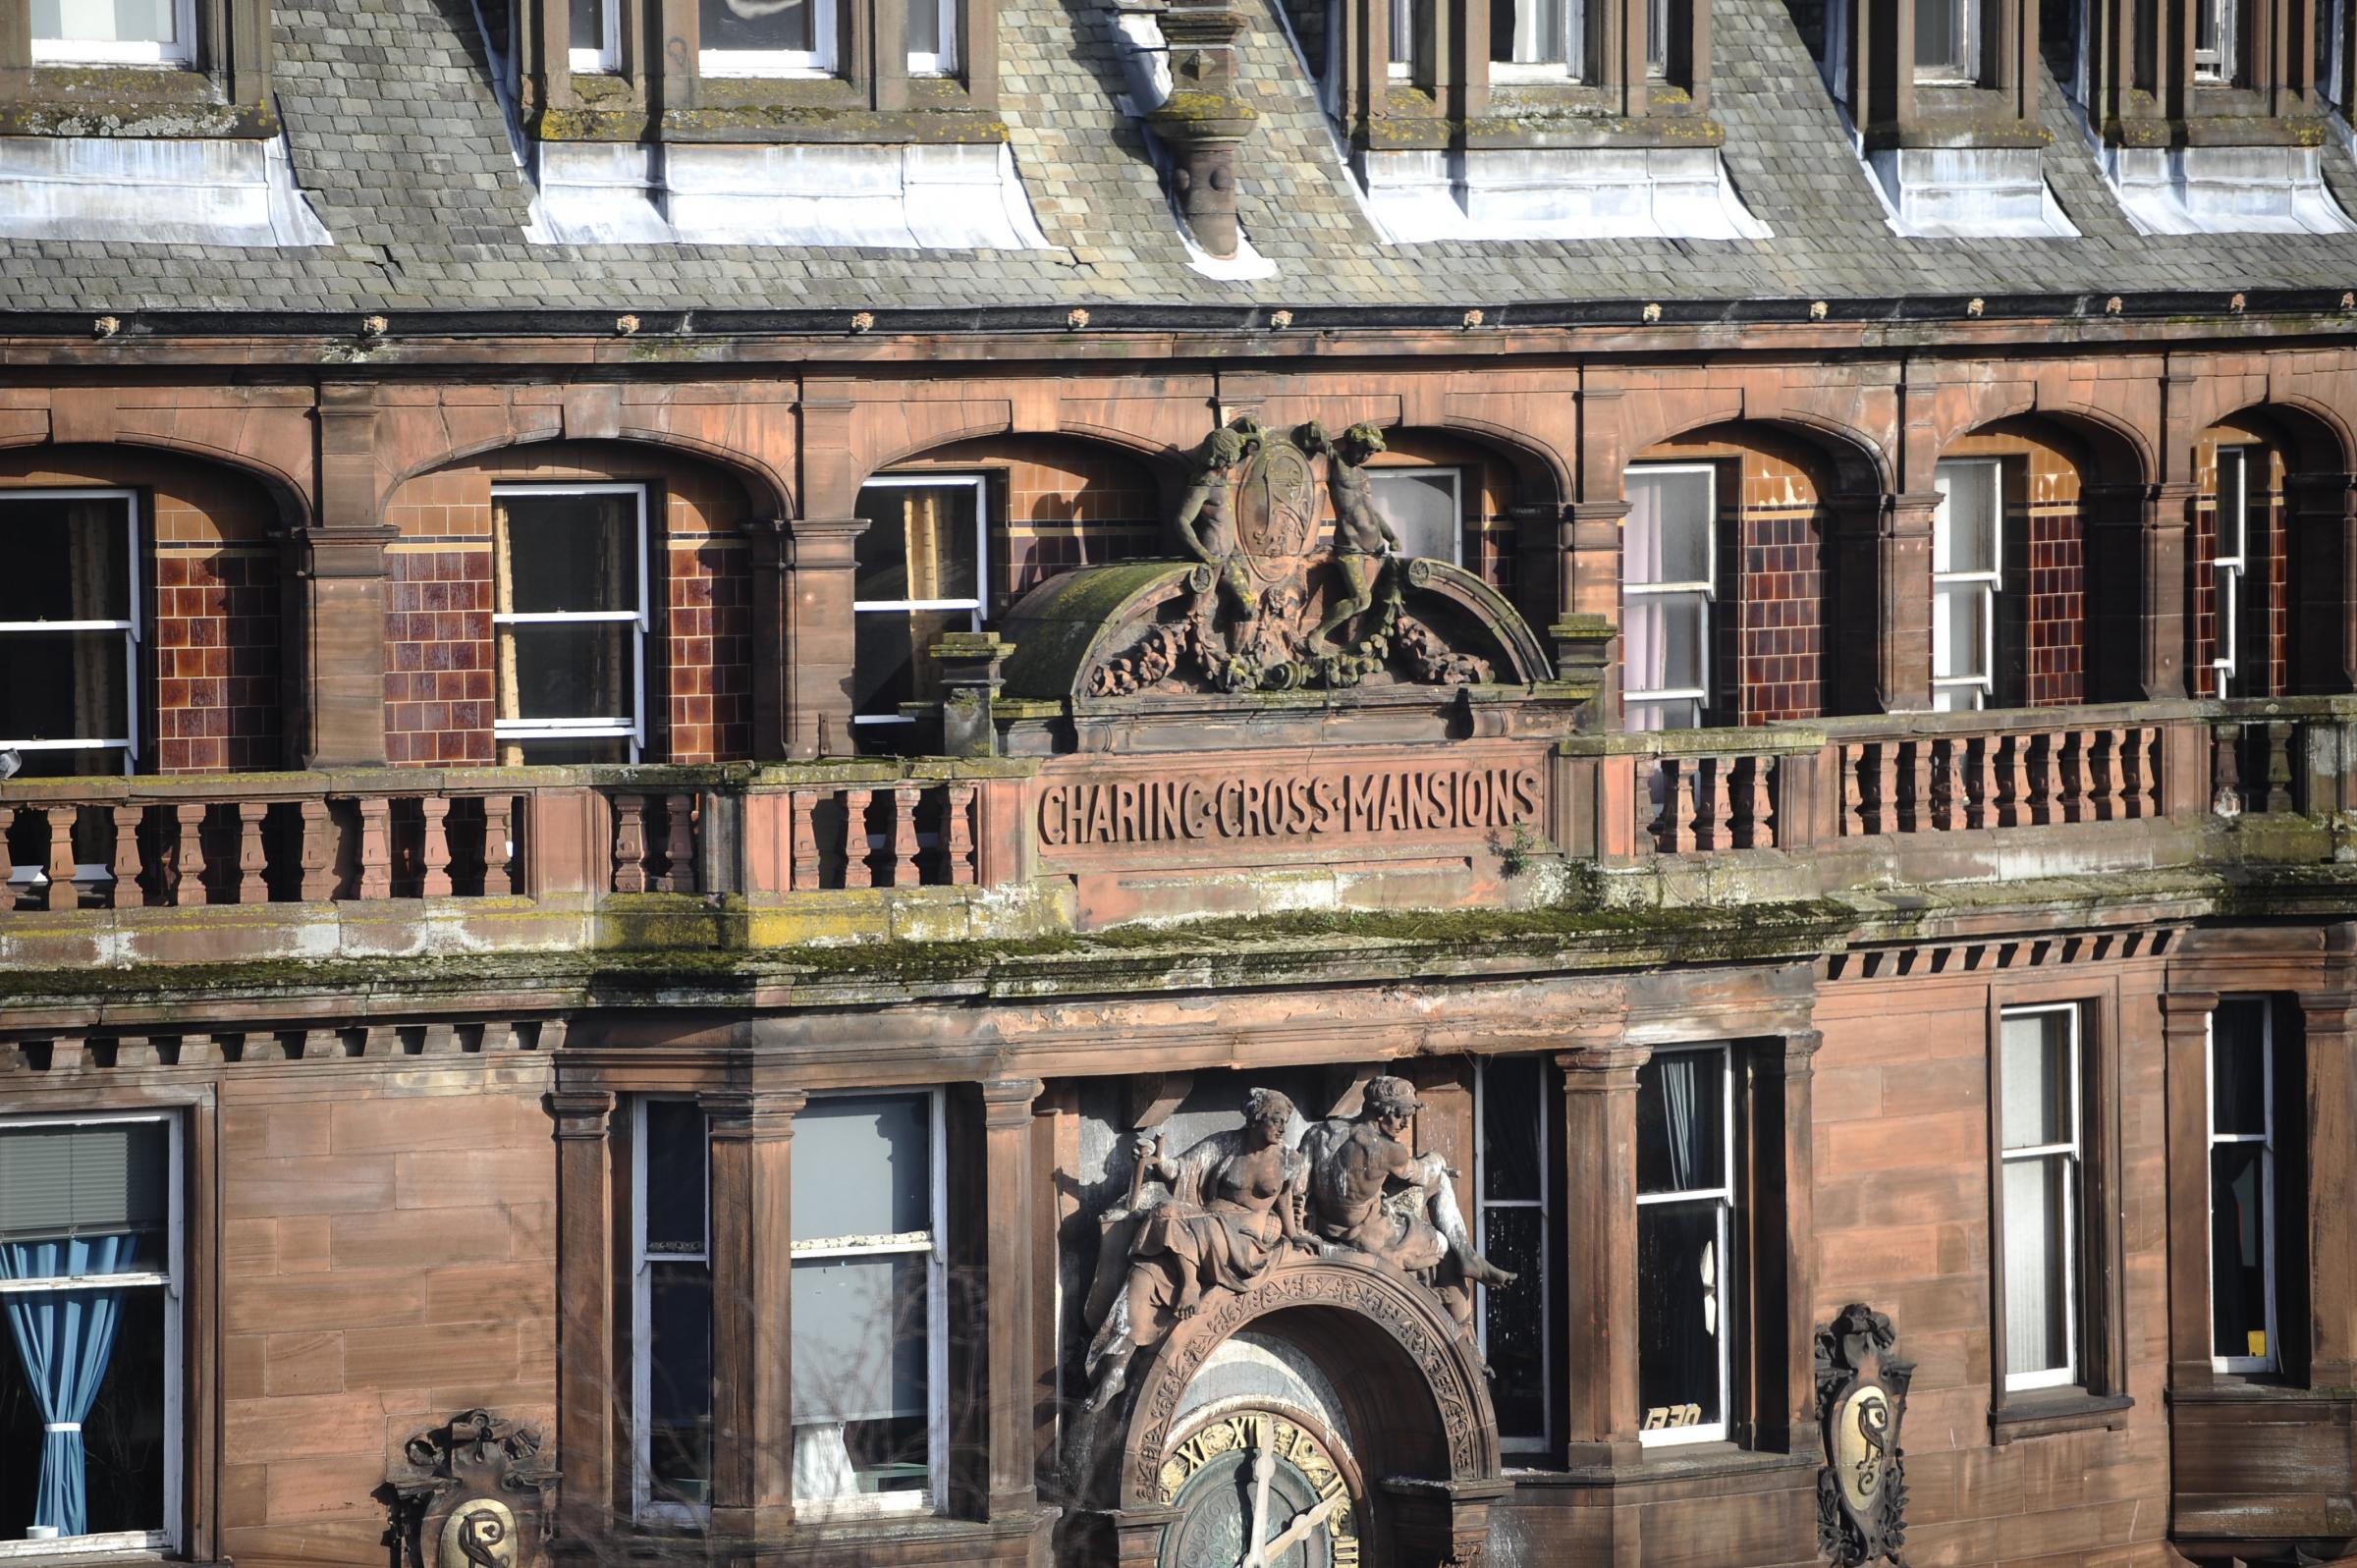 Glasgow’s Charing Cross Mansions are a fine example of the work of John James Burnet